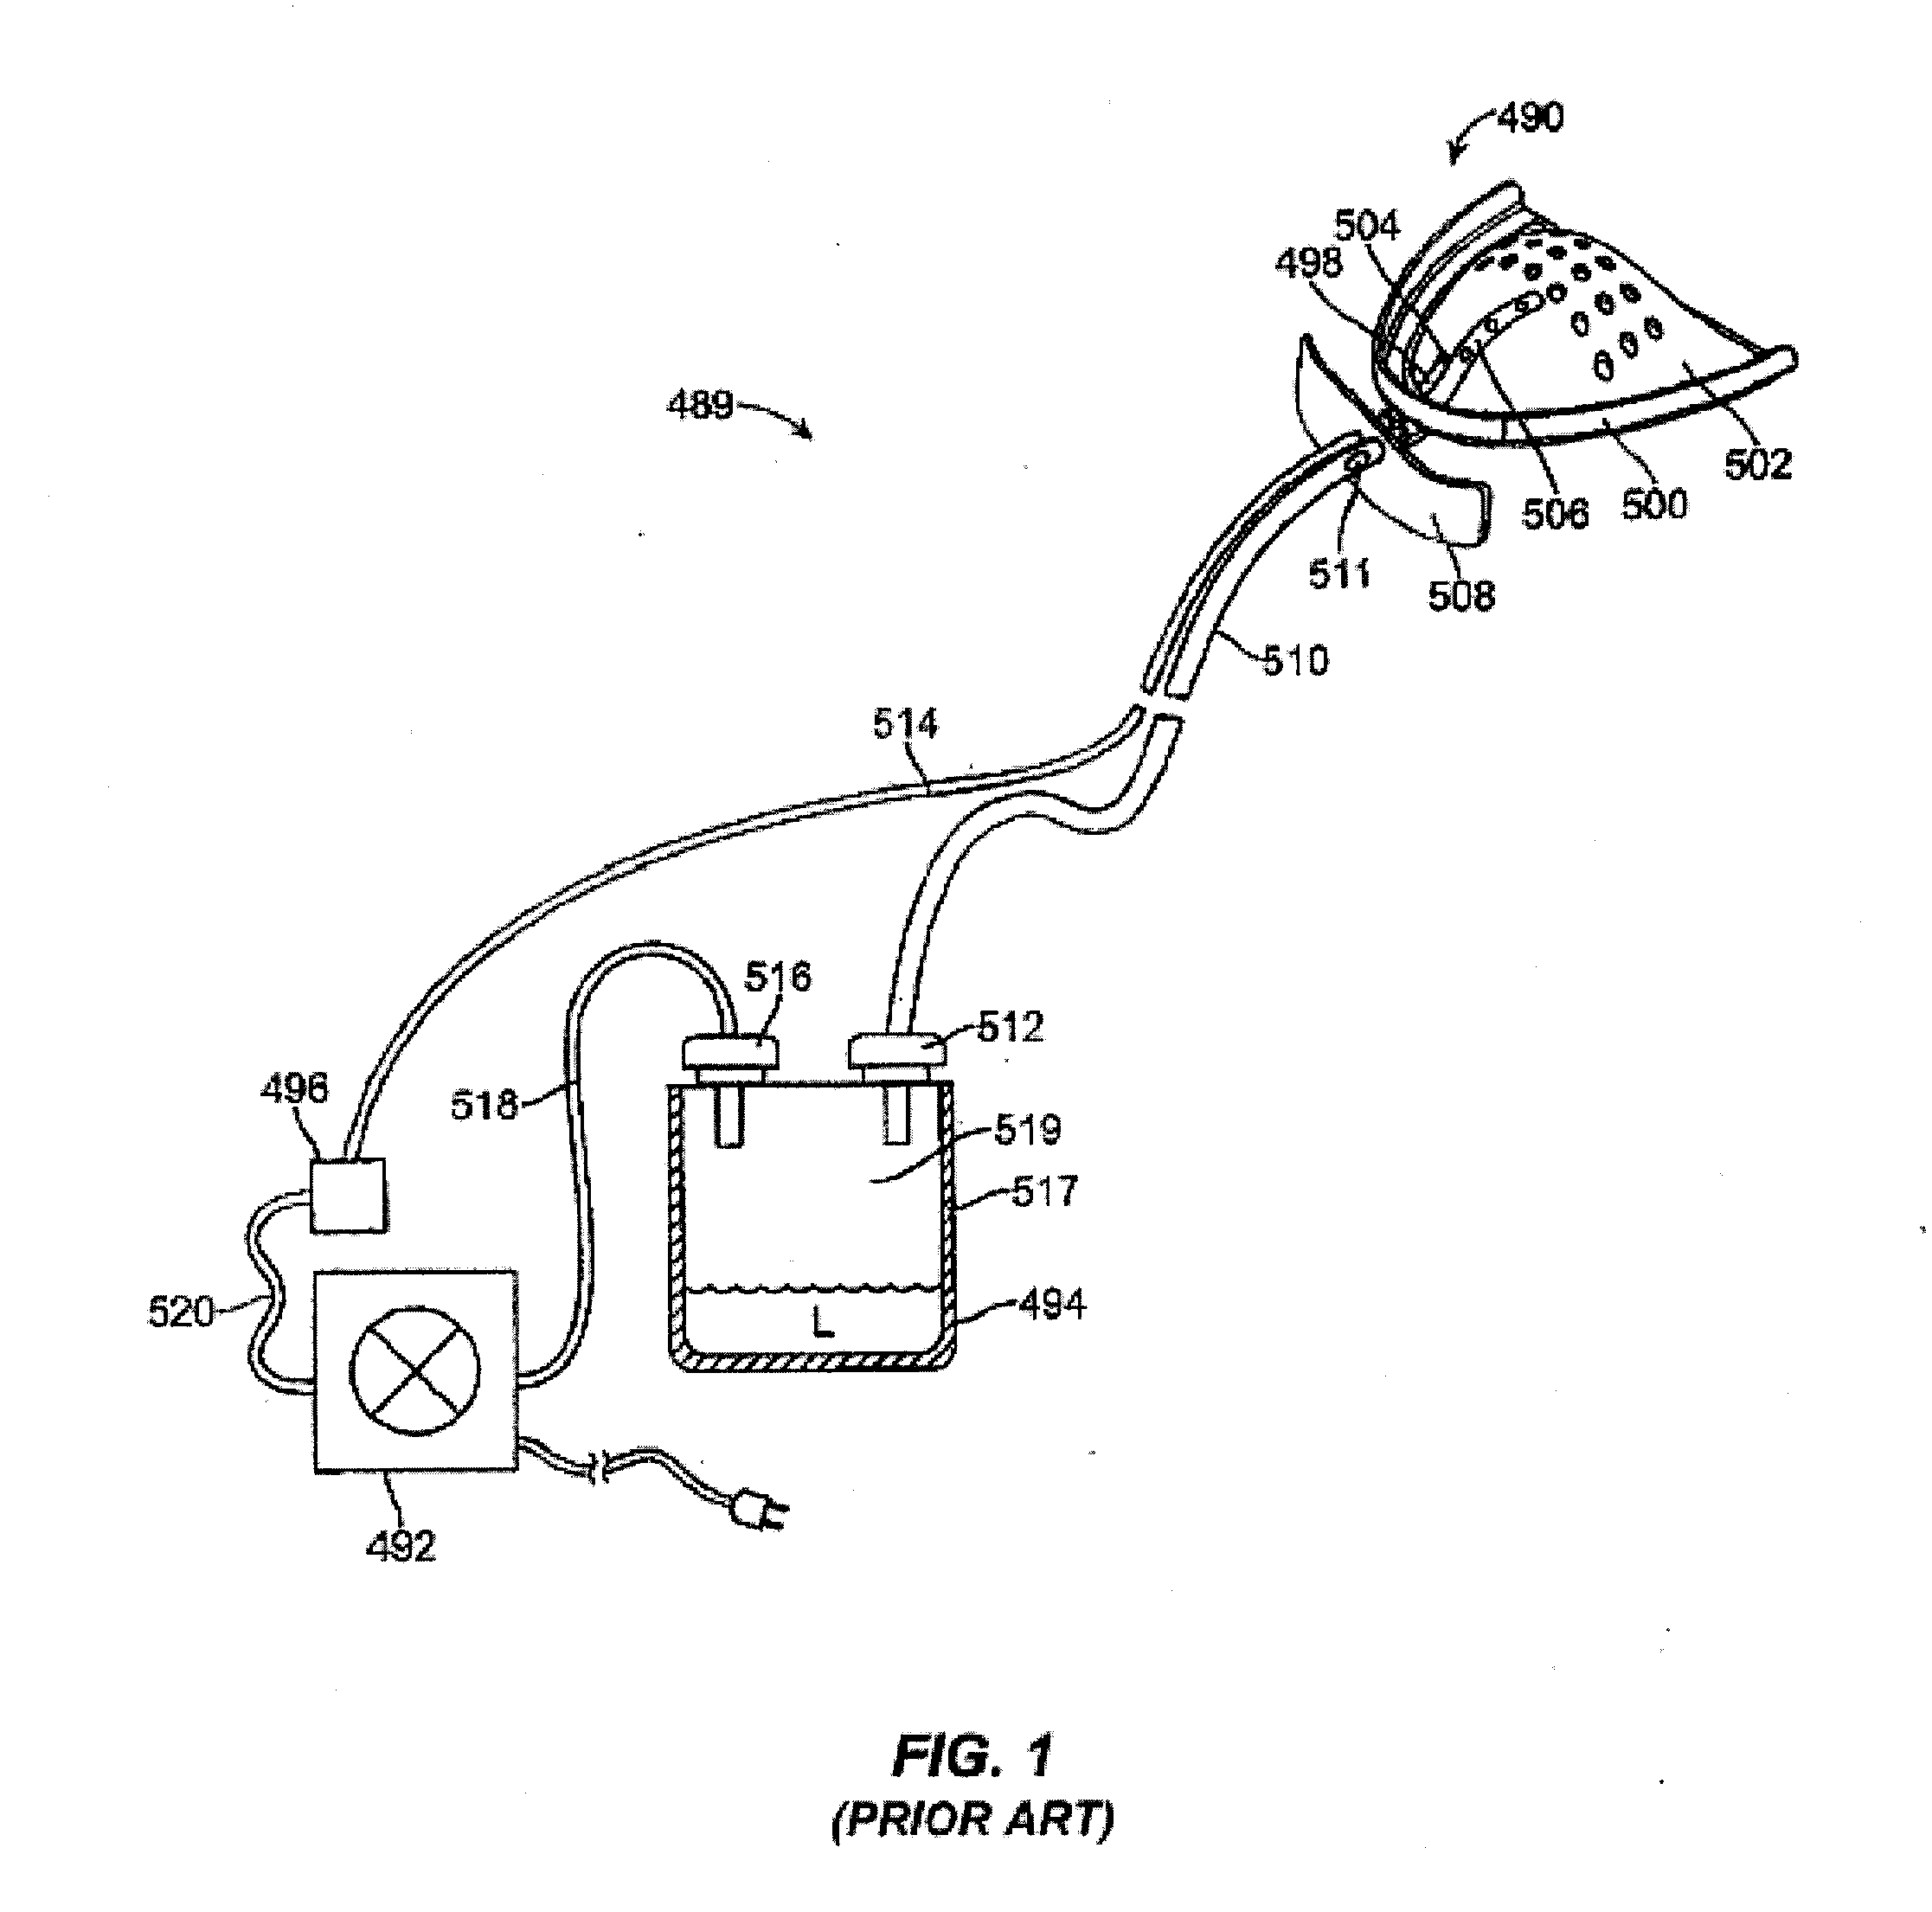 Heating Element for Reducing Foaming During Saliva Collection